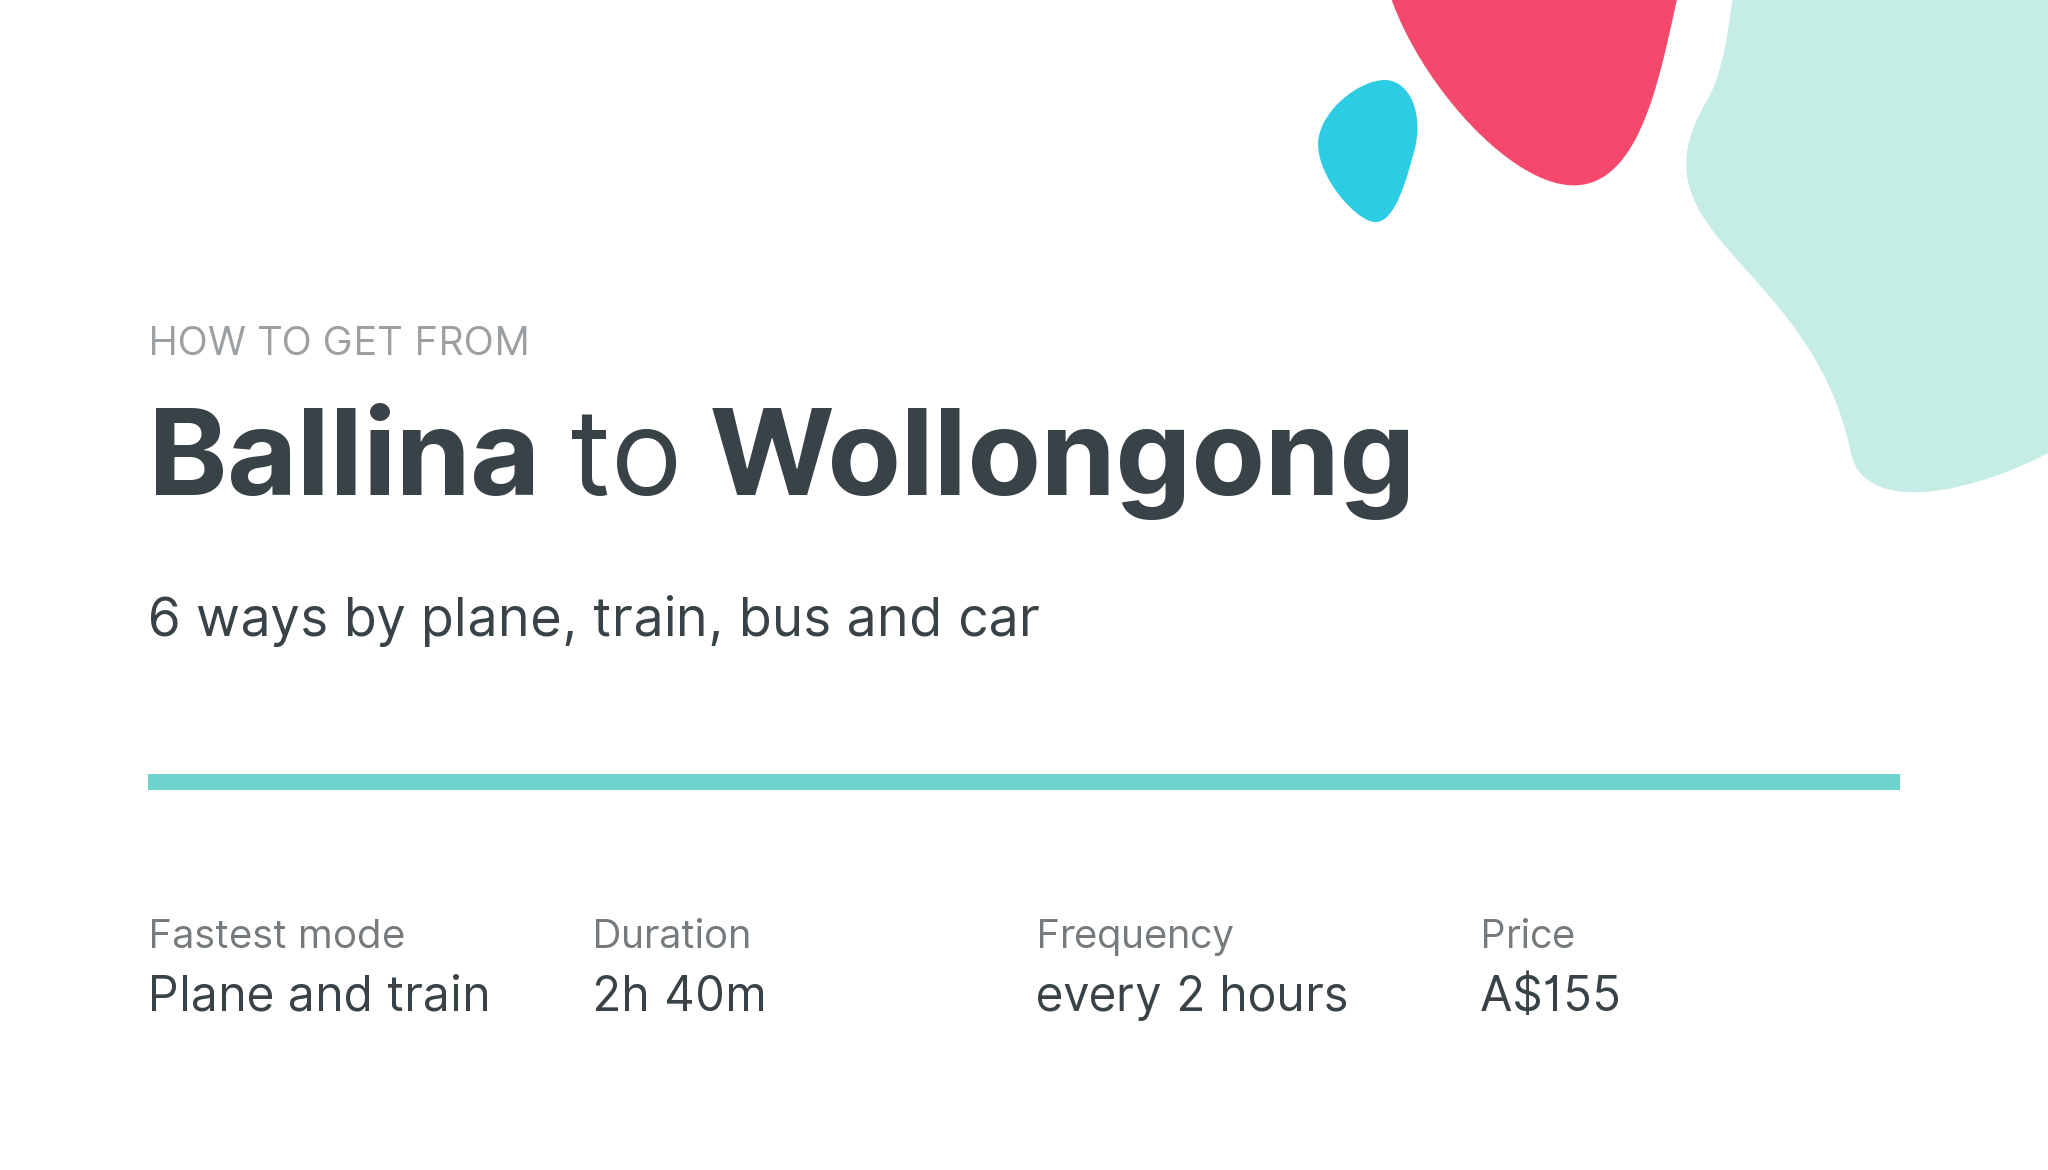 How do I get from Ballina to Wollongong